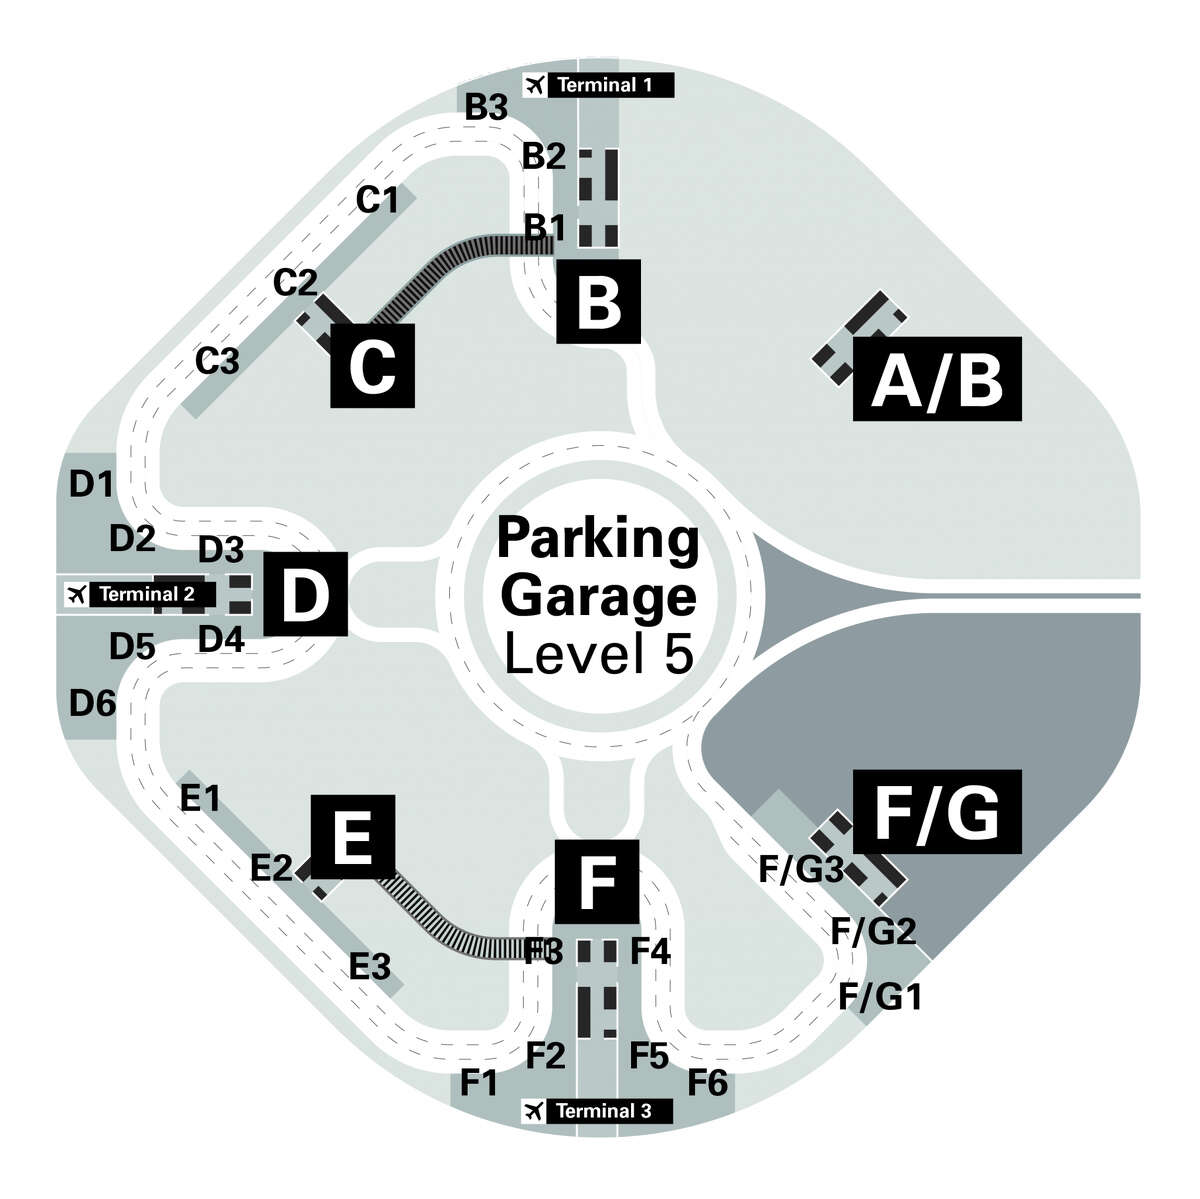 Here's a diagram of the new ridesharing pick up area on the top of SFO's domestic parking deck.